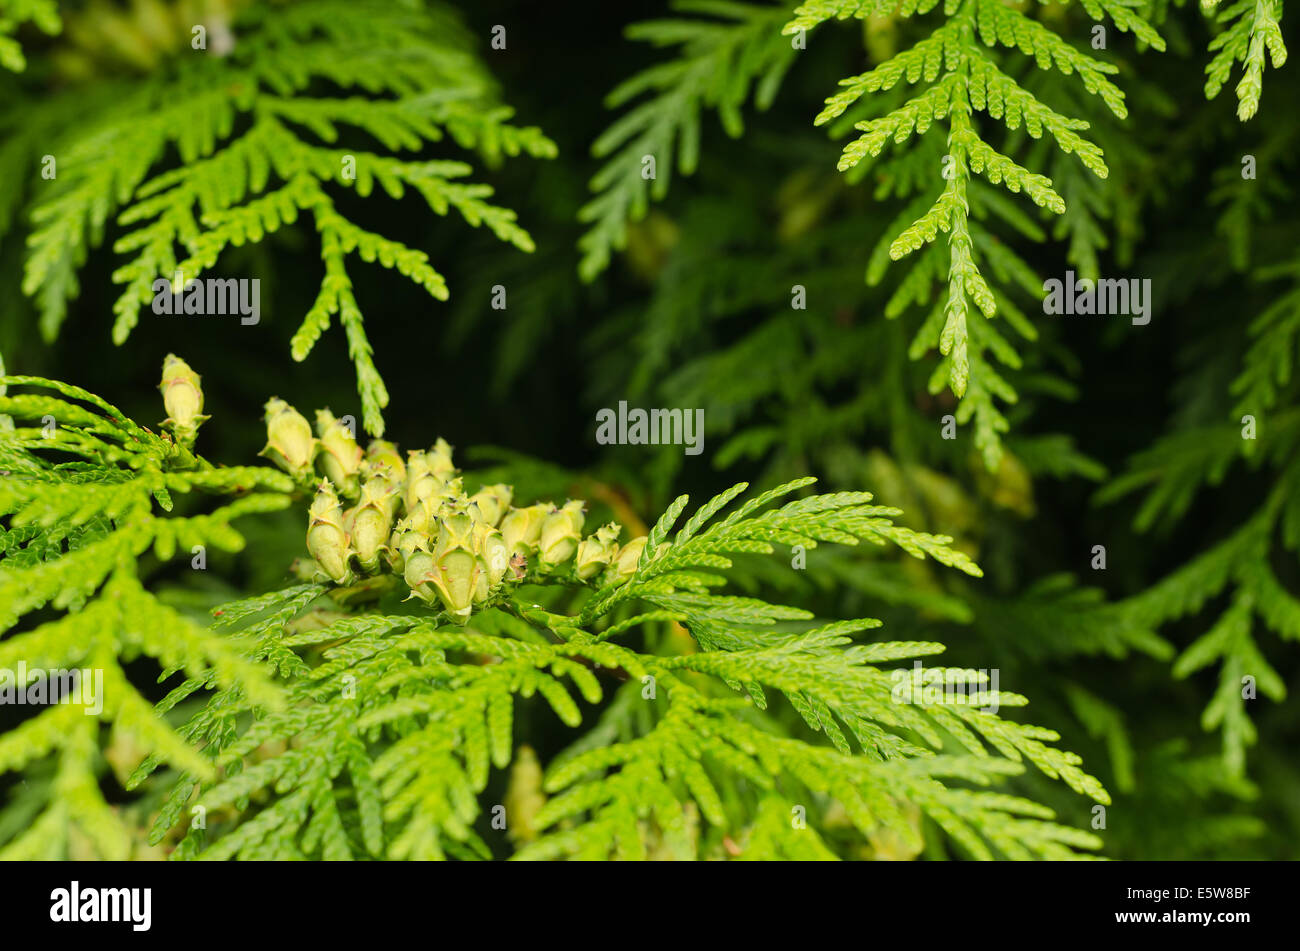 details of small delicate leaves of conifer cypress tree with mini seed cones amongst dark depths of foliage Stock Photo